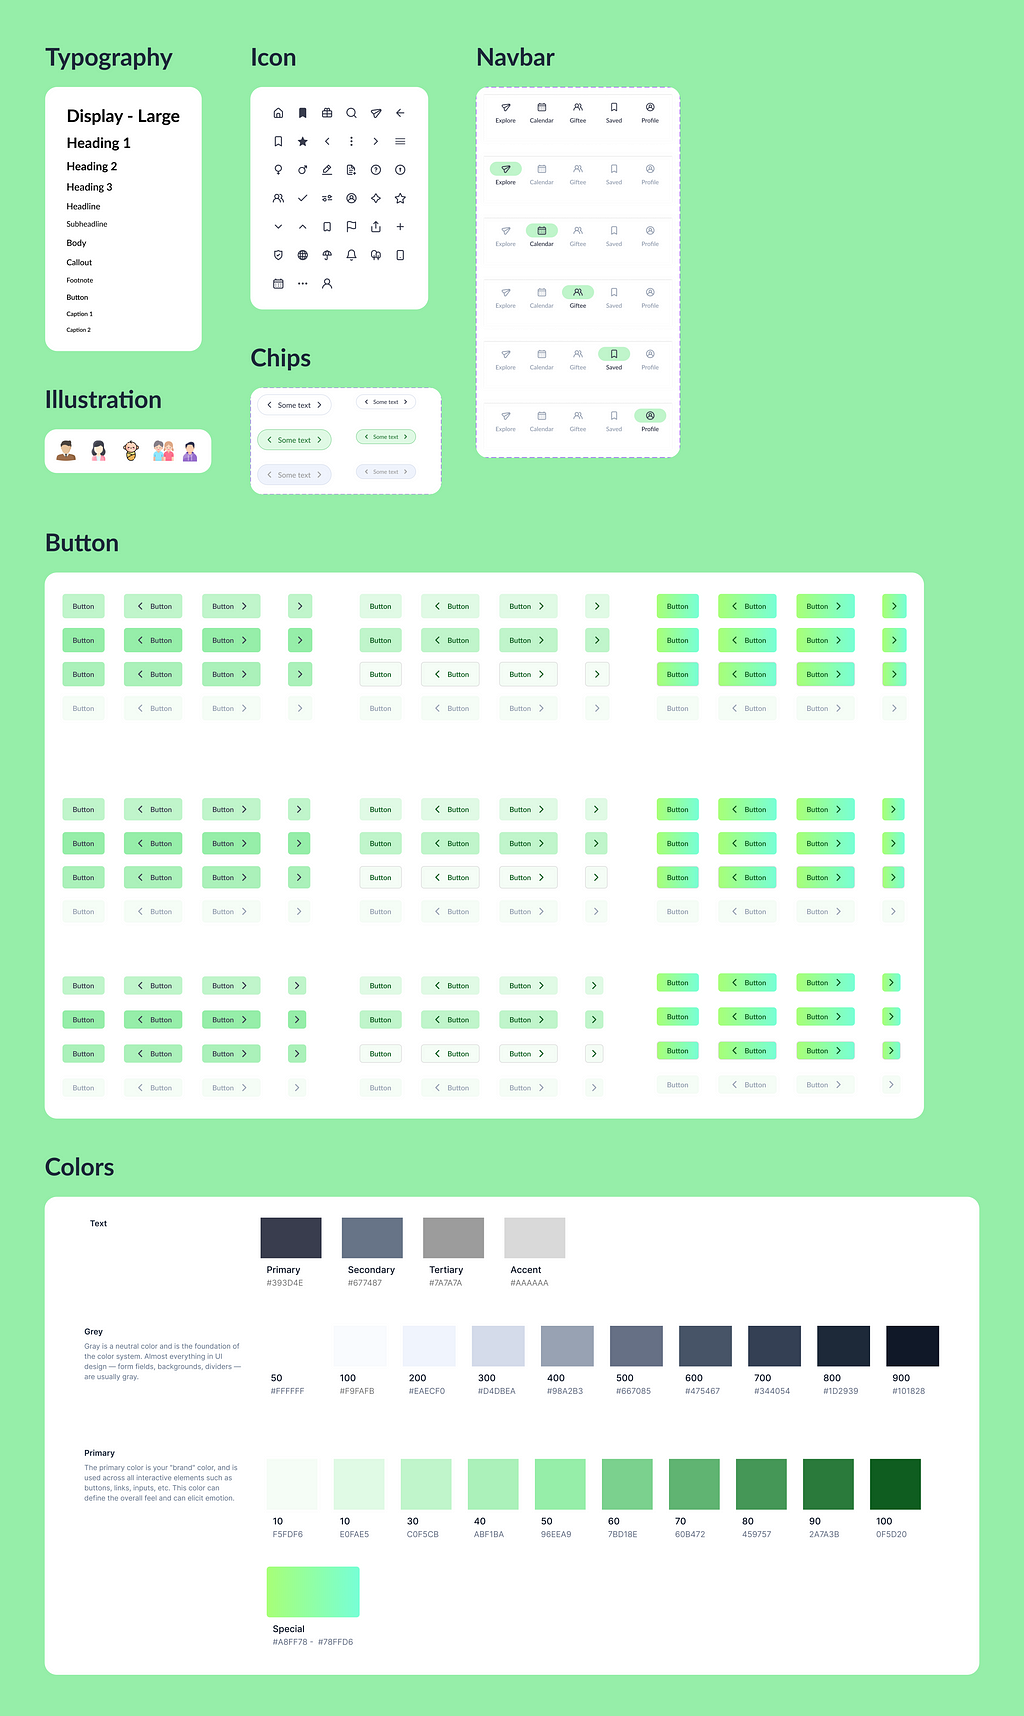 mini design system that include reusable components such as buttons, Bottom Navbar, chips and also style guides such as typography, icon, colors, and illustrations.